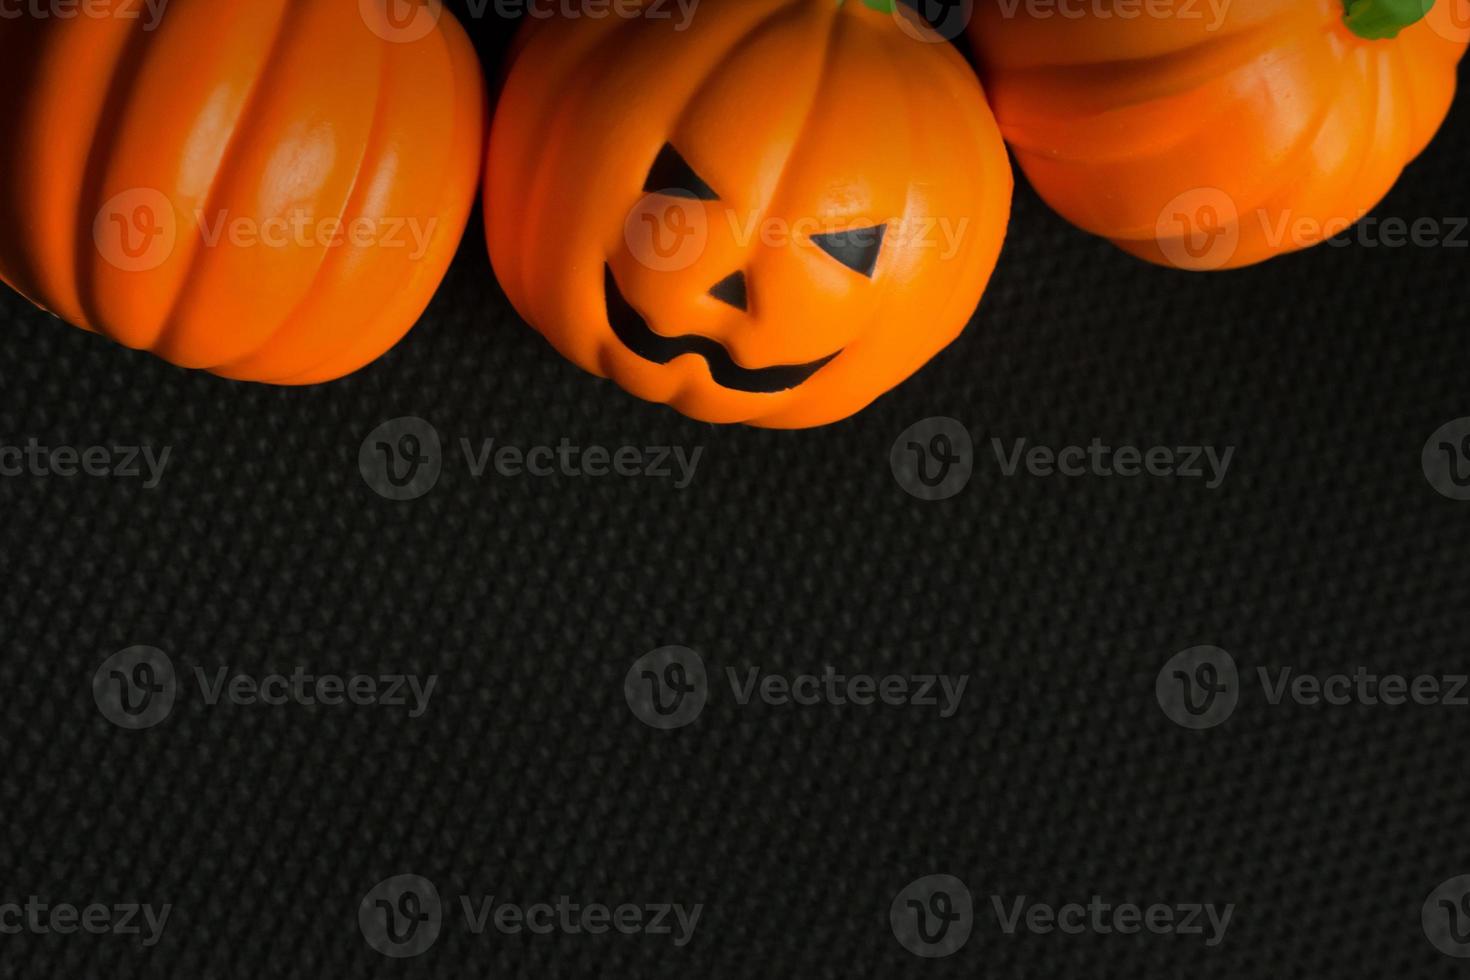 The halloween pumpkin jack in black holiday background image. photo